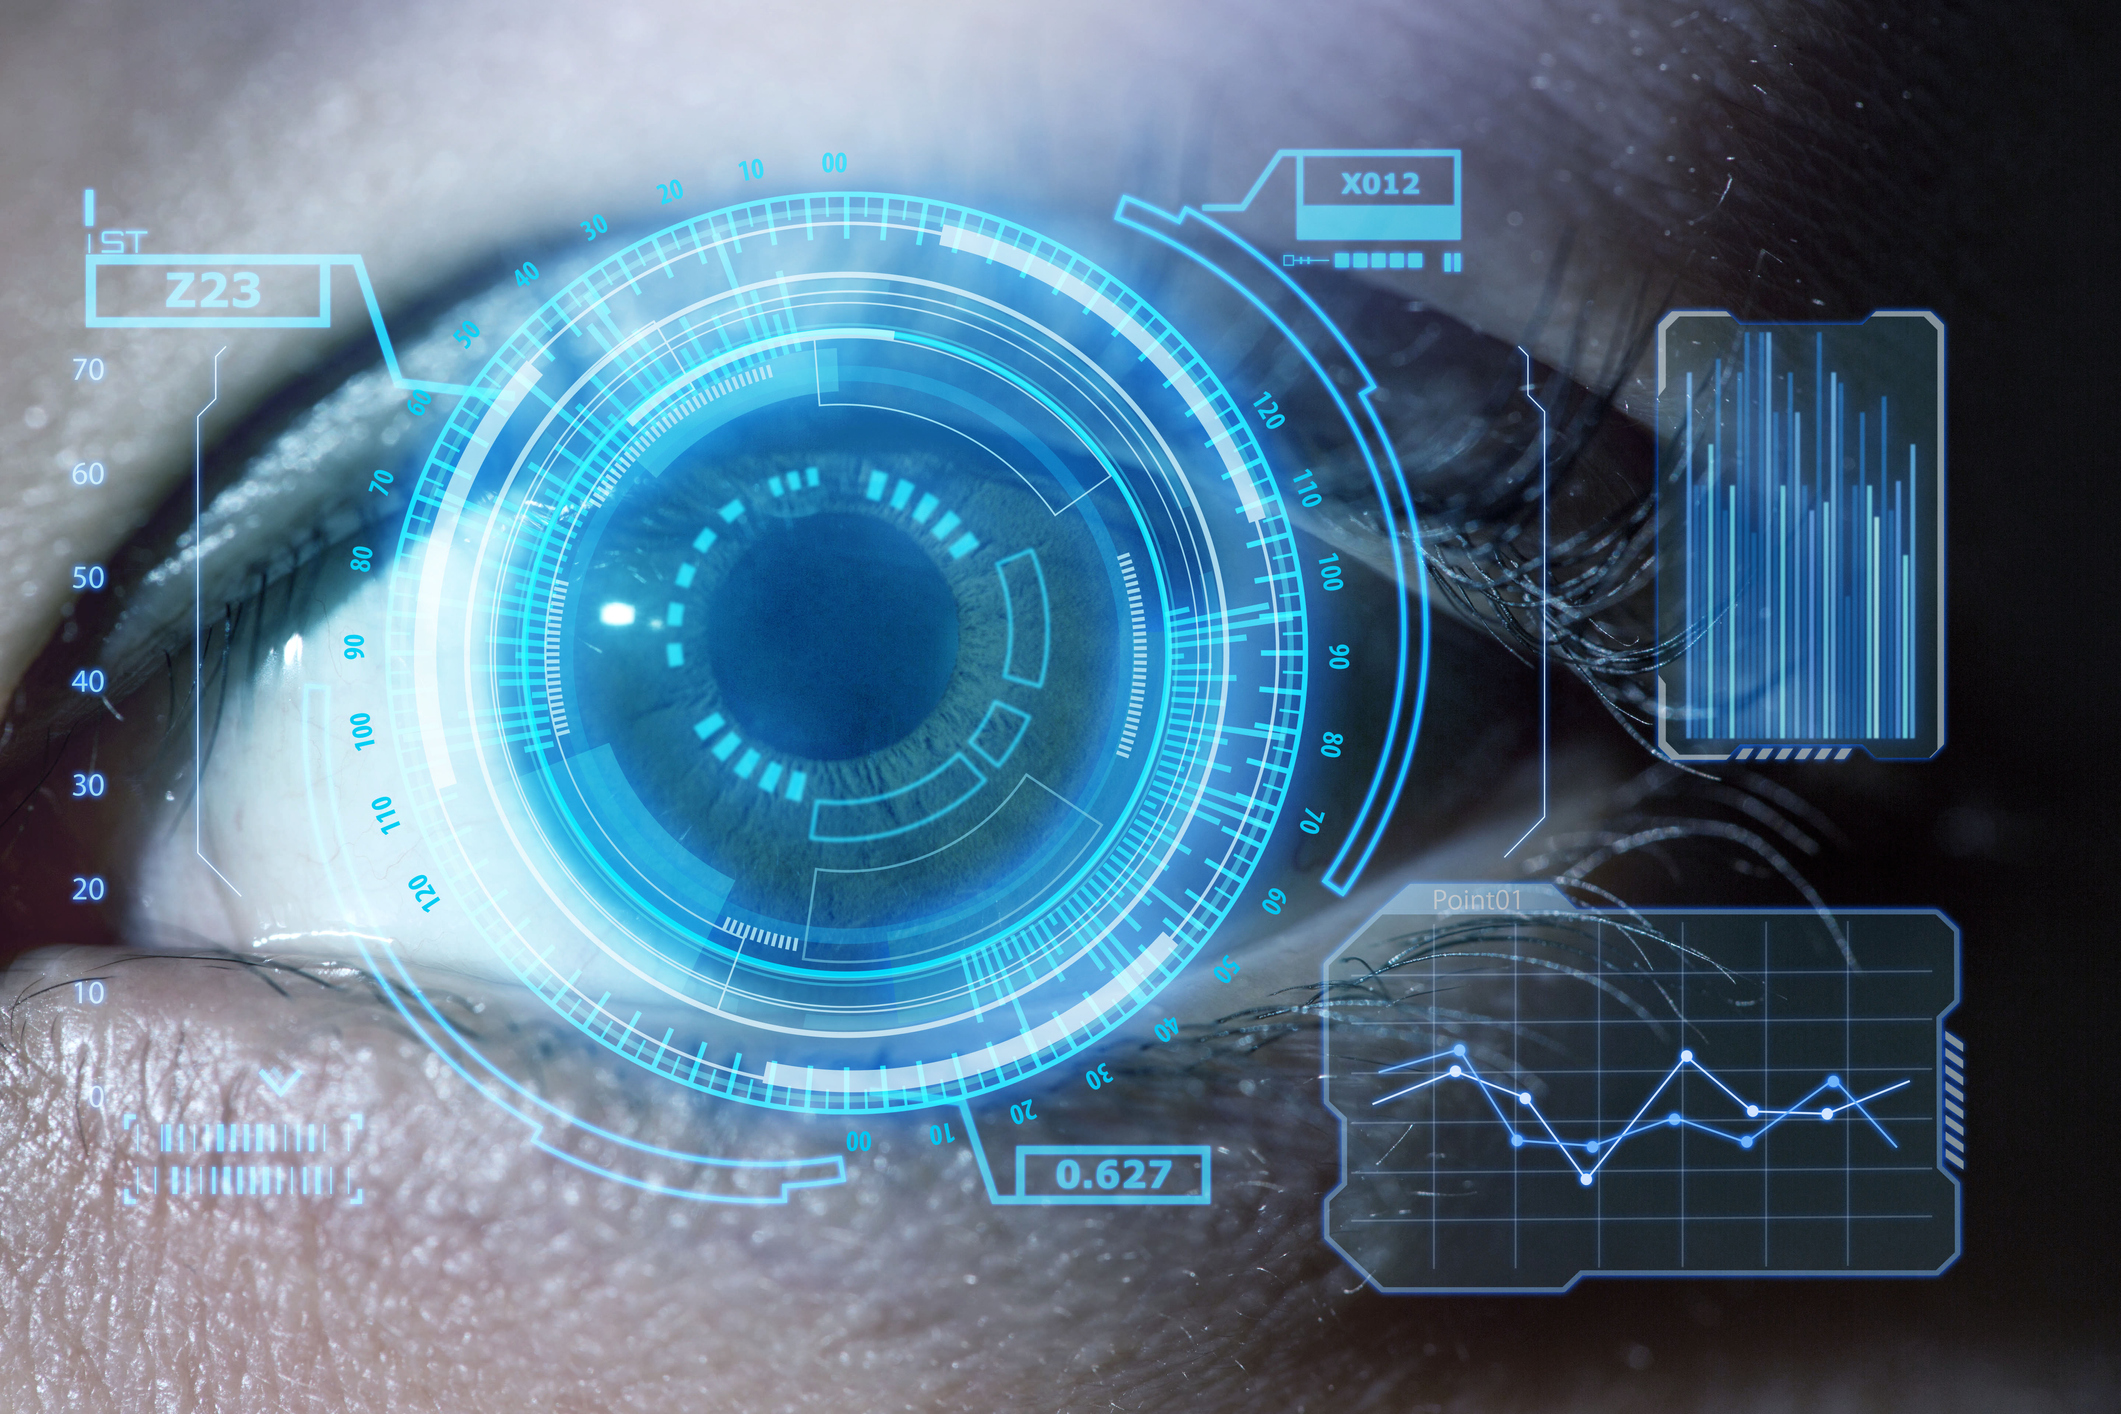 Human eye with using the graphical user interface technology - stock photo